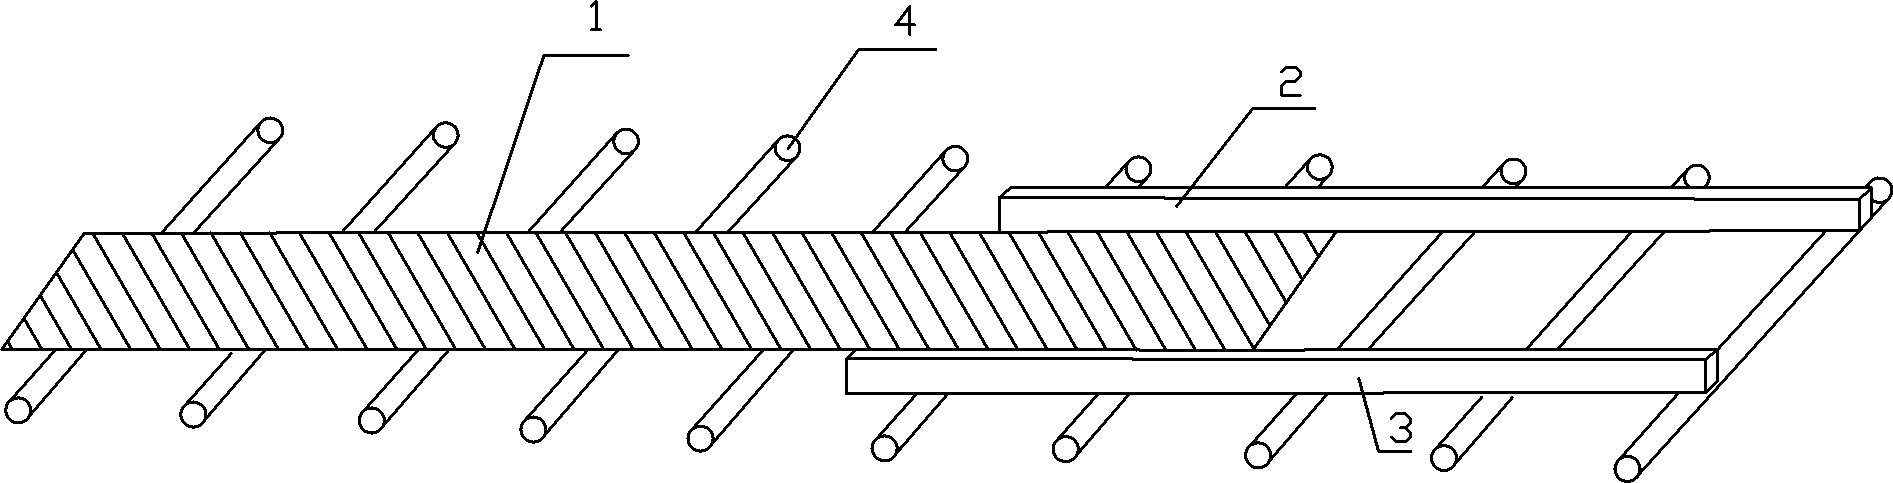 Control method of hot-rolling rolled side guide plate for improving hot-rolling roll shape quality